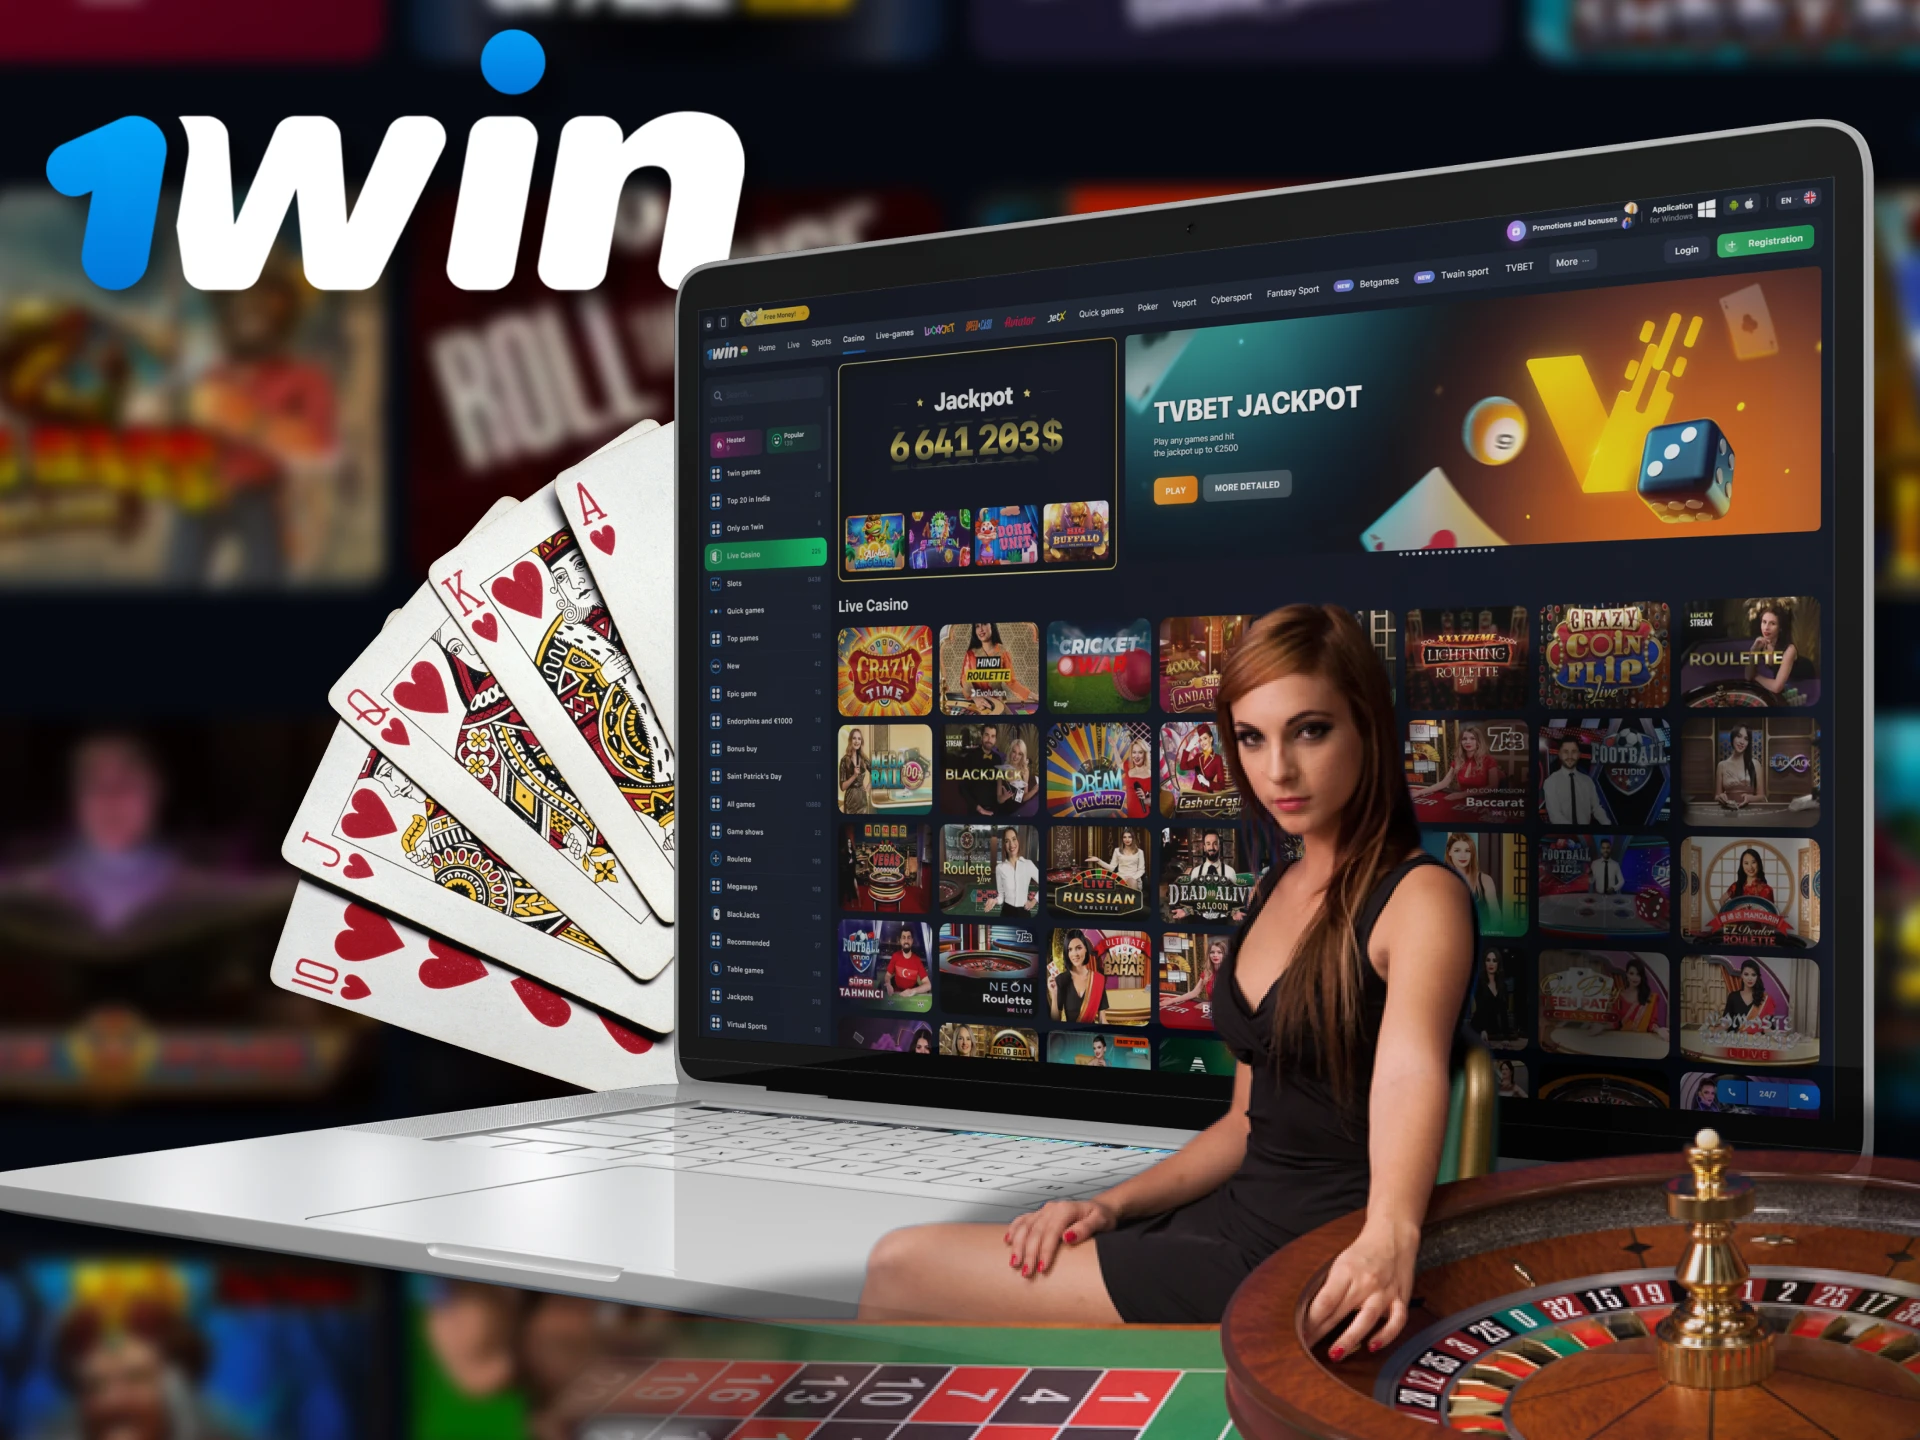 The 1win live casino section is available for playing with real dealers.